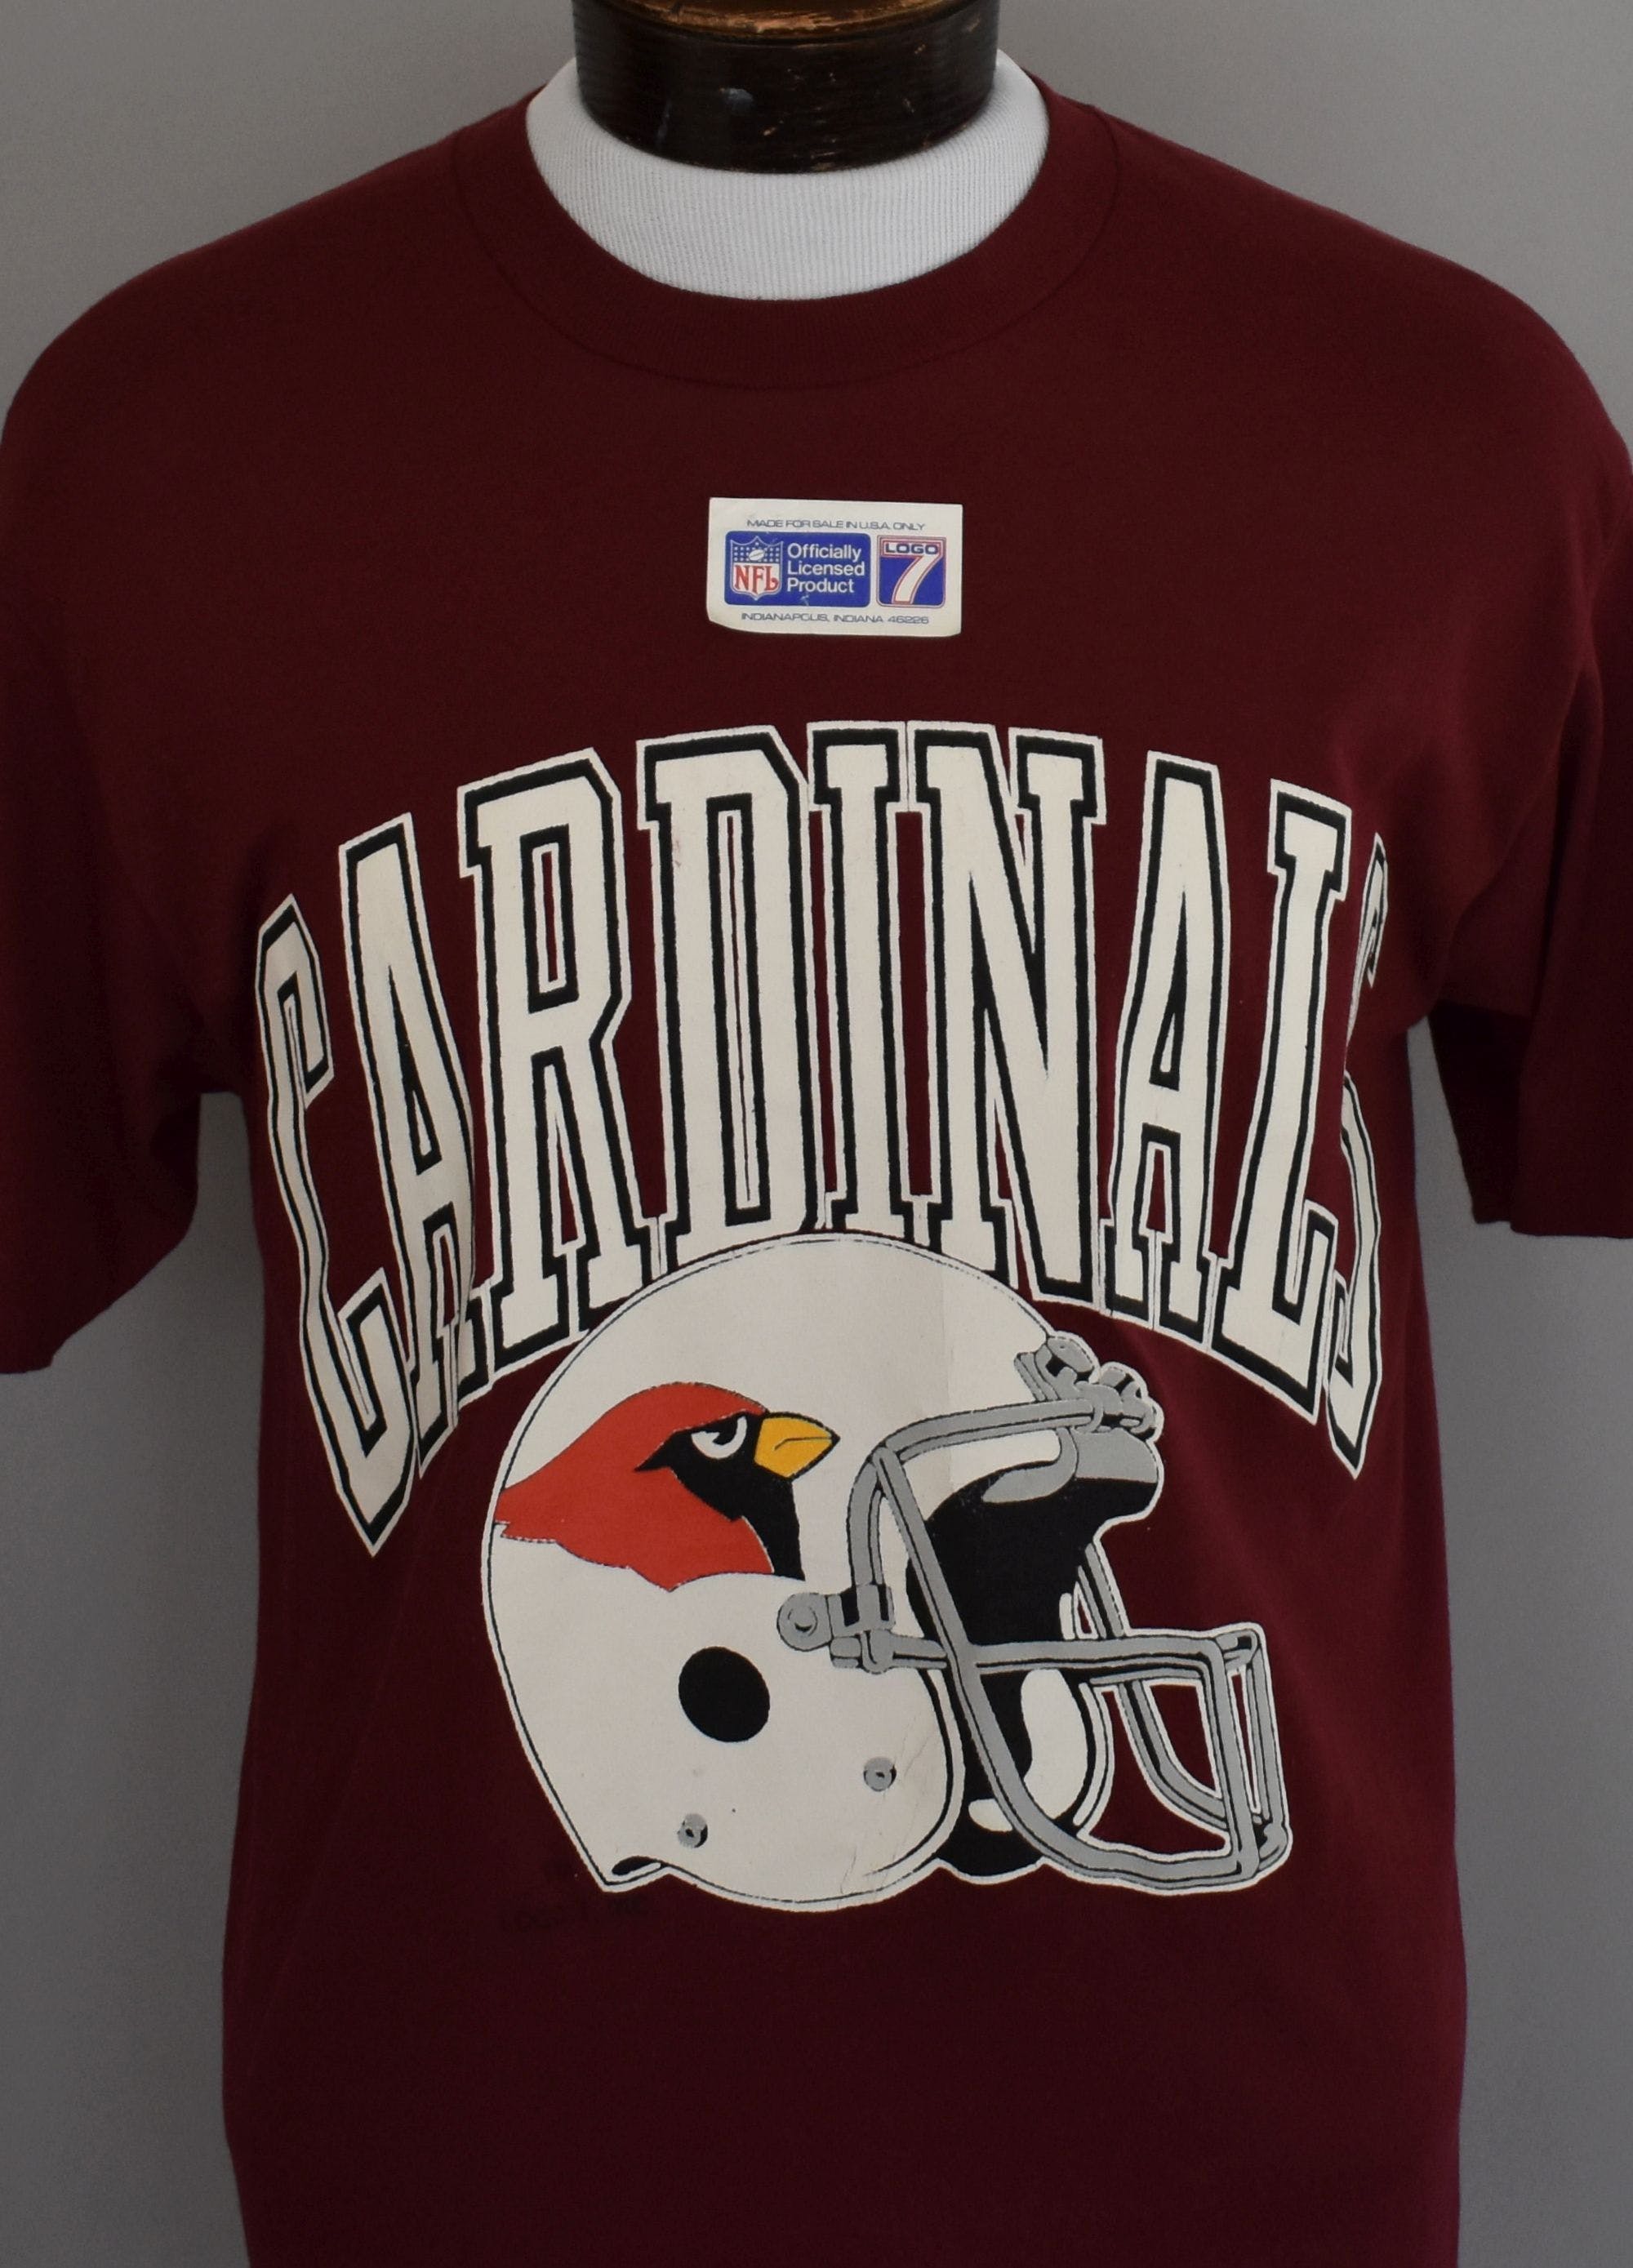 arizona cardinals jersey products for sale